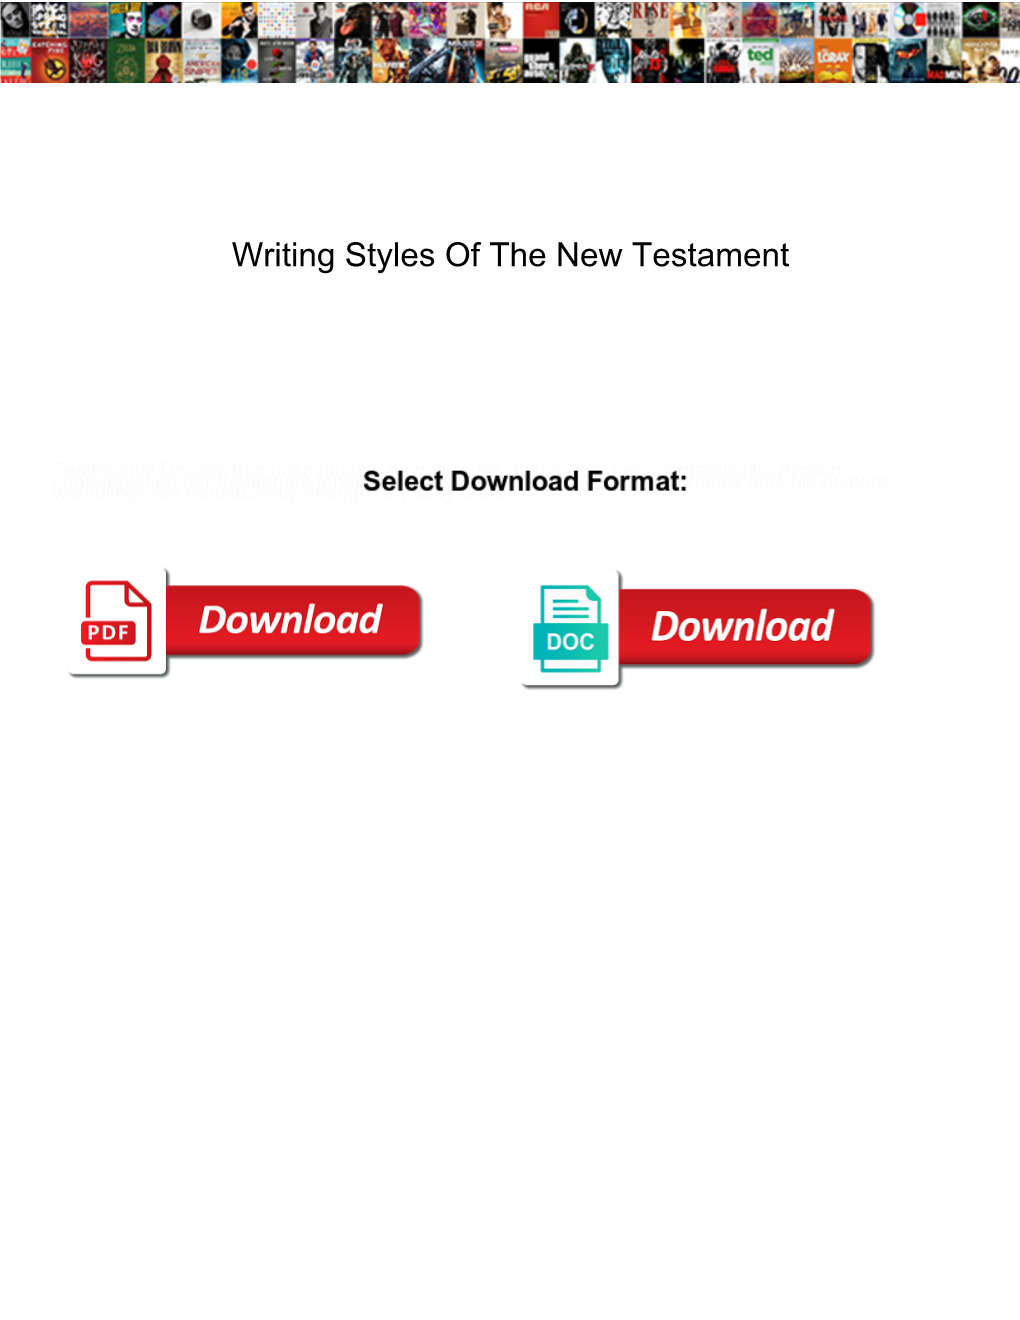 Writing Styles of the New Testament